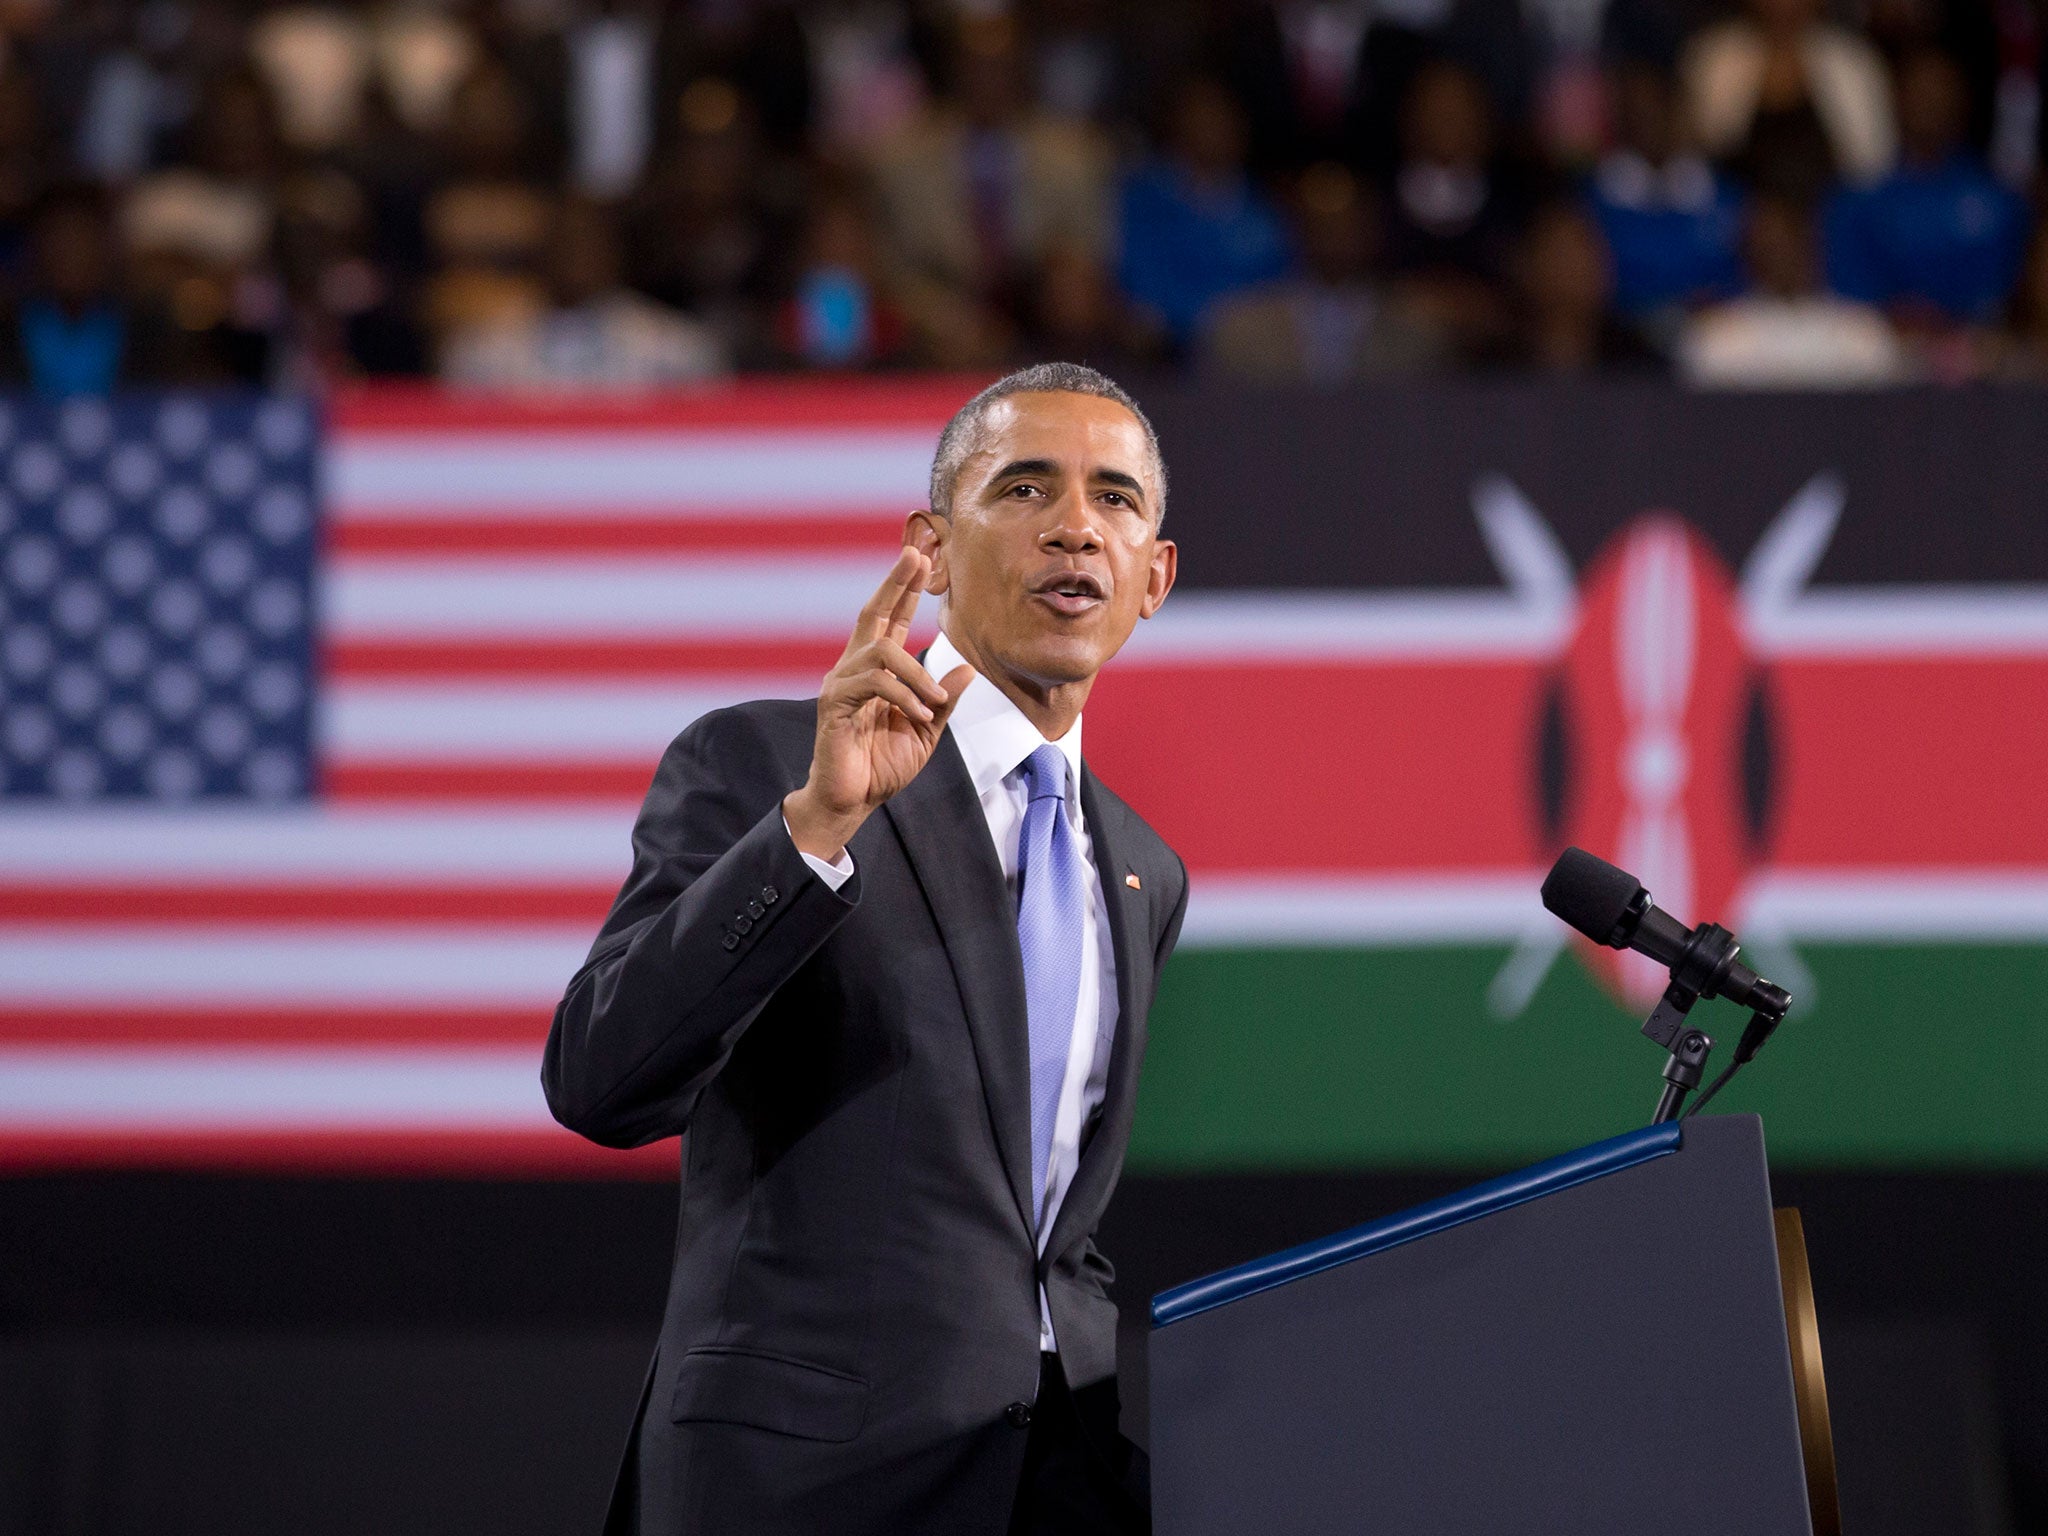 Barack Obama speaking at the Kasarani stadium to enthusiastic crowds at the end of his visit